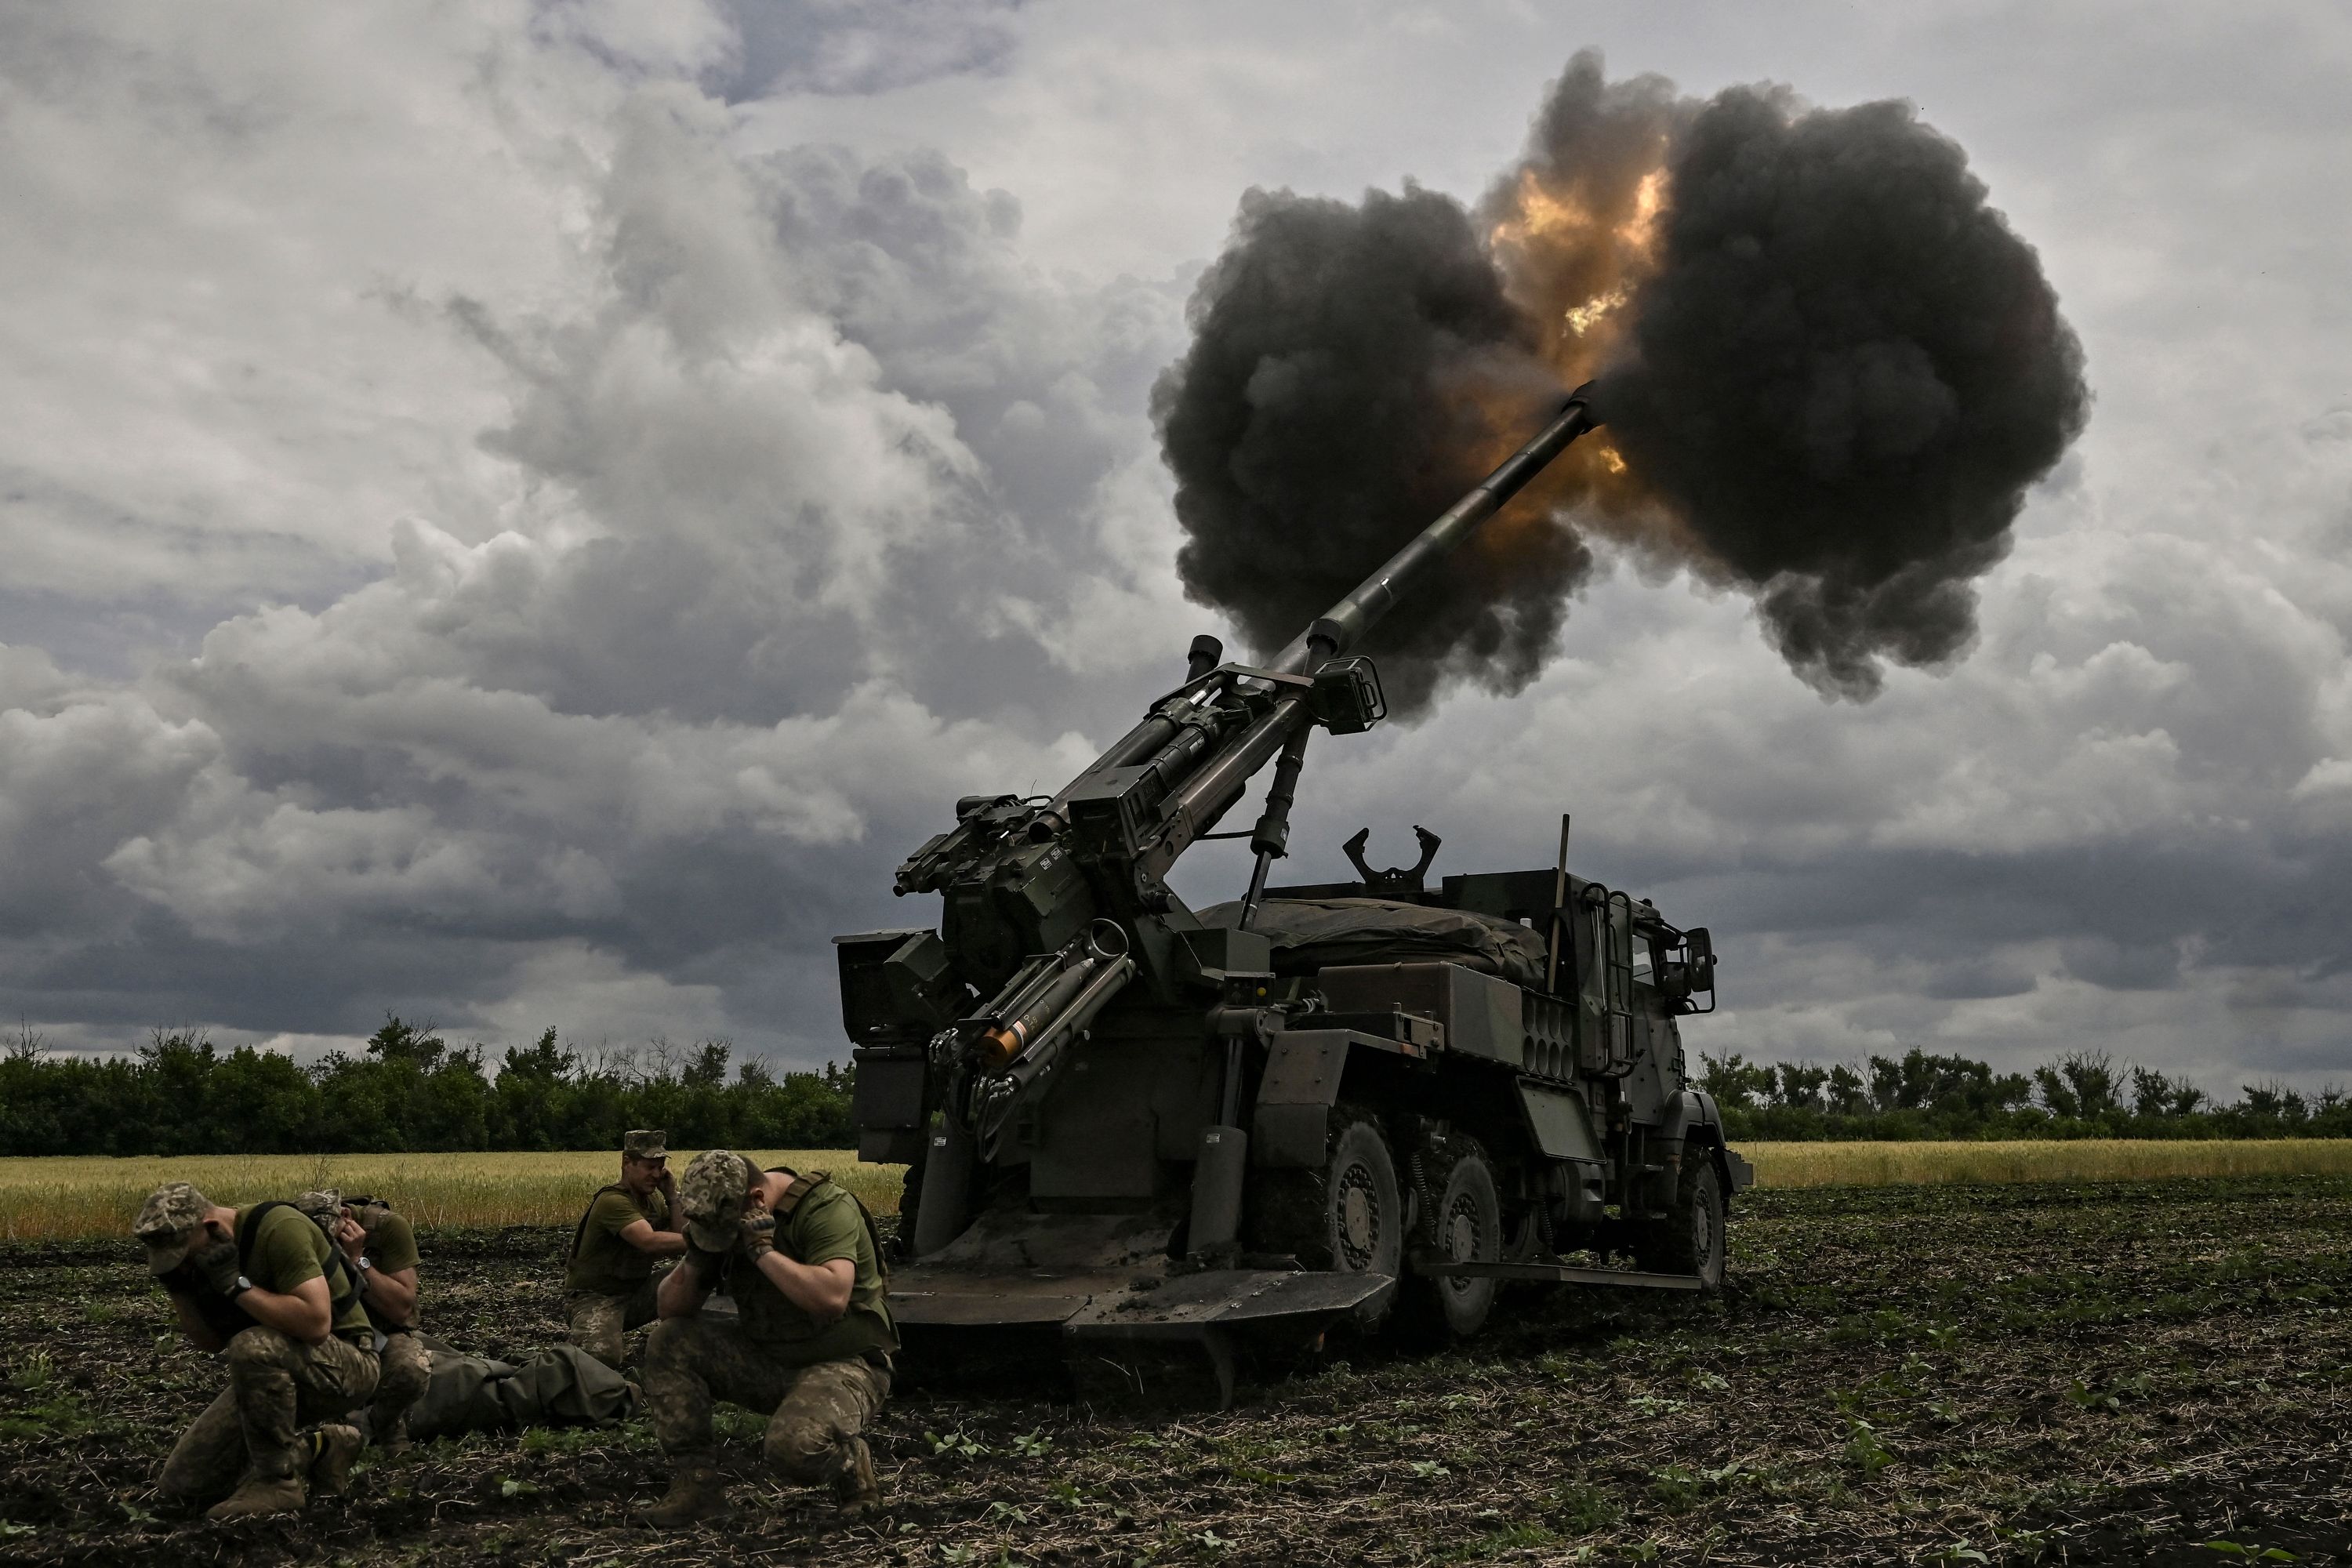 Ukrainian counterattacks exploit Russia’s focus but are stymied by lack of weapons